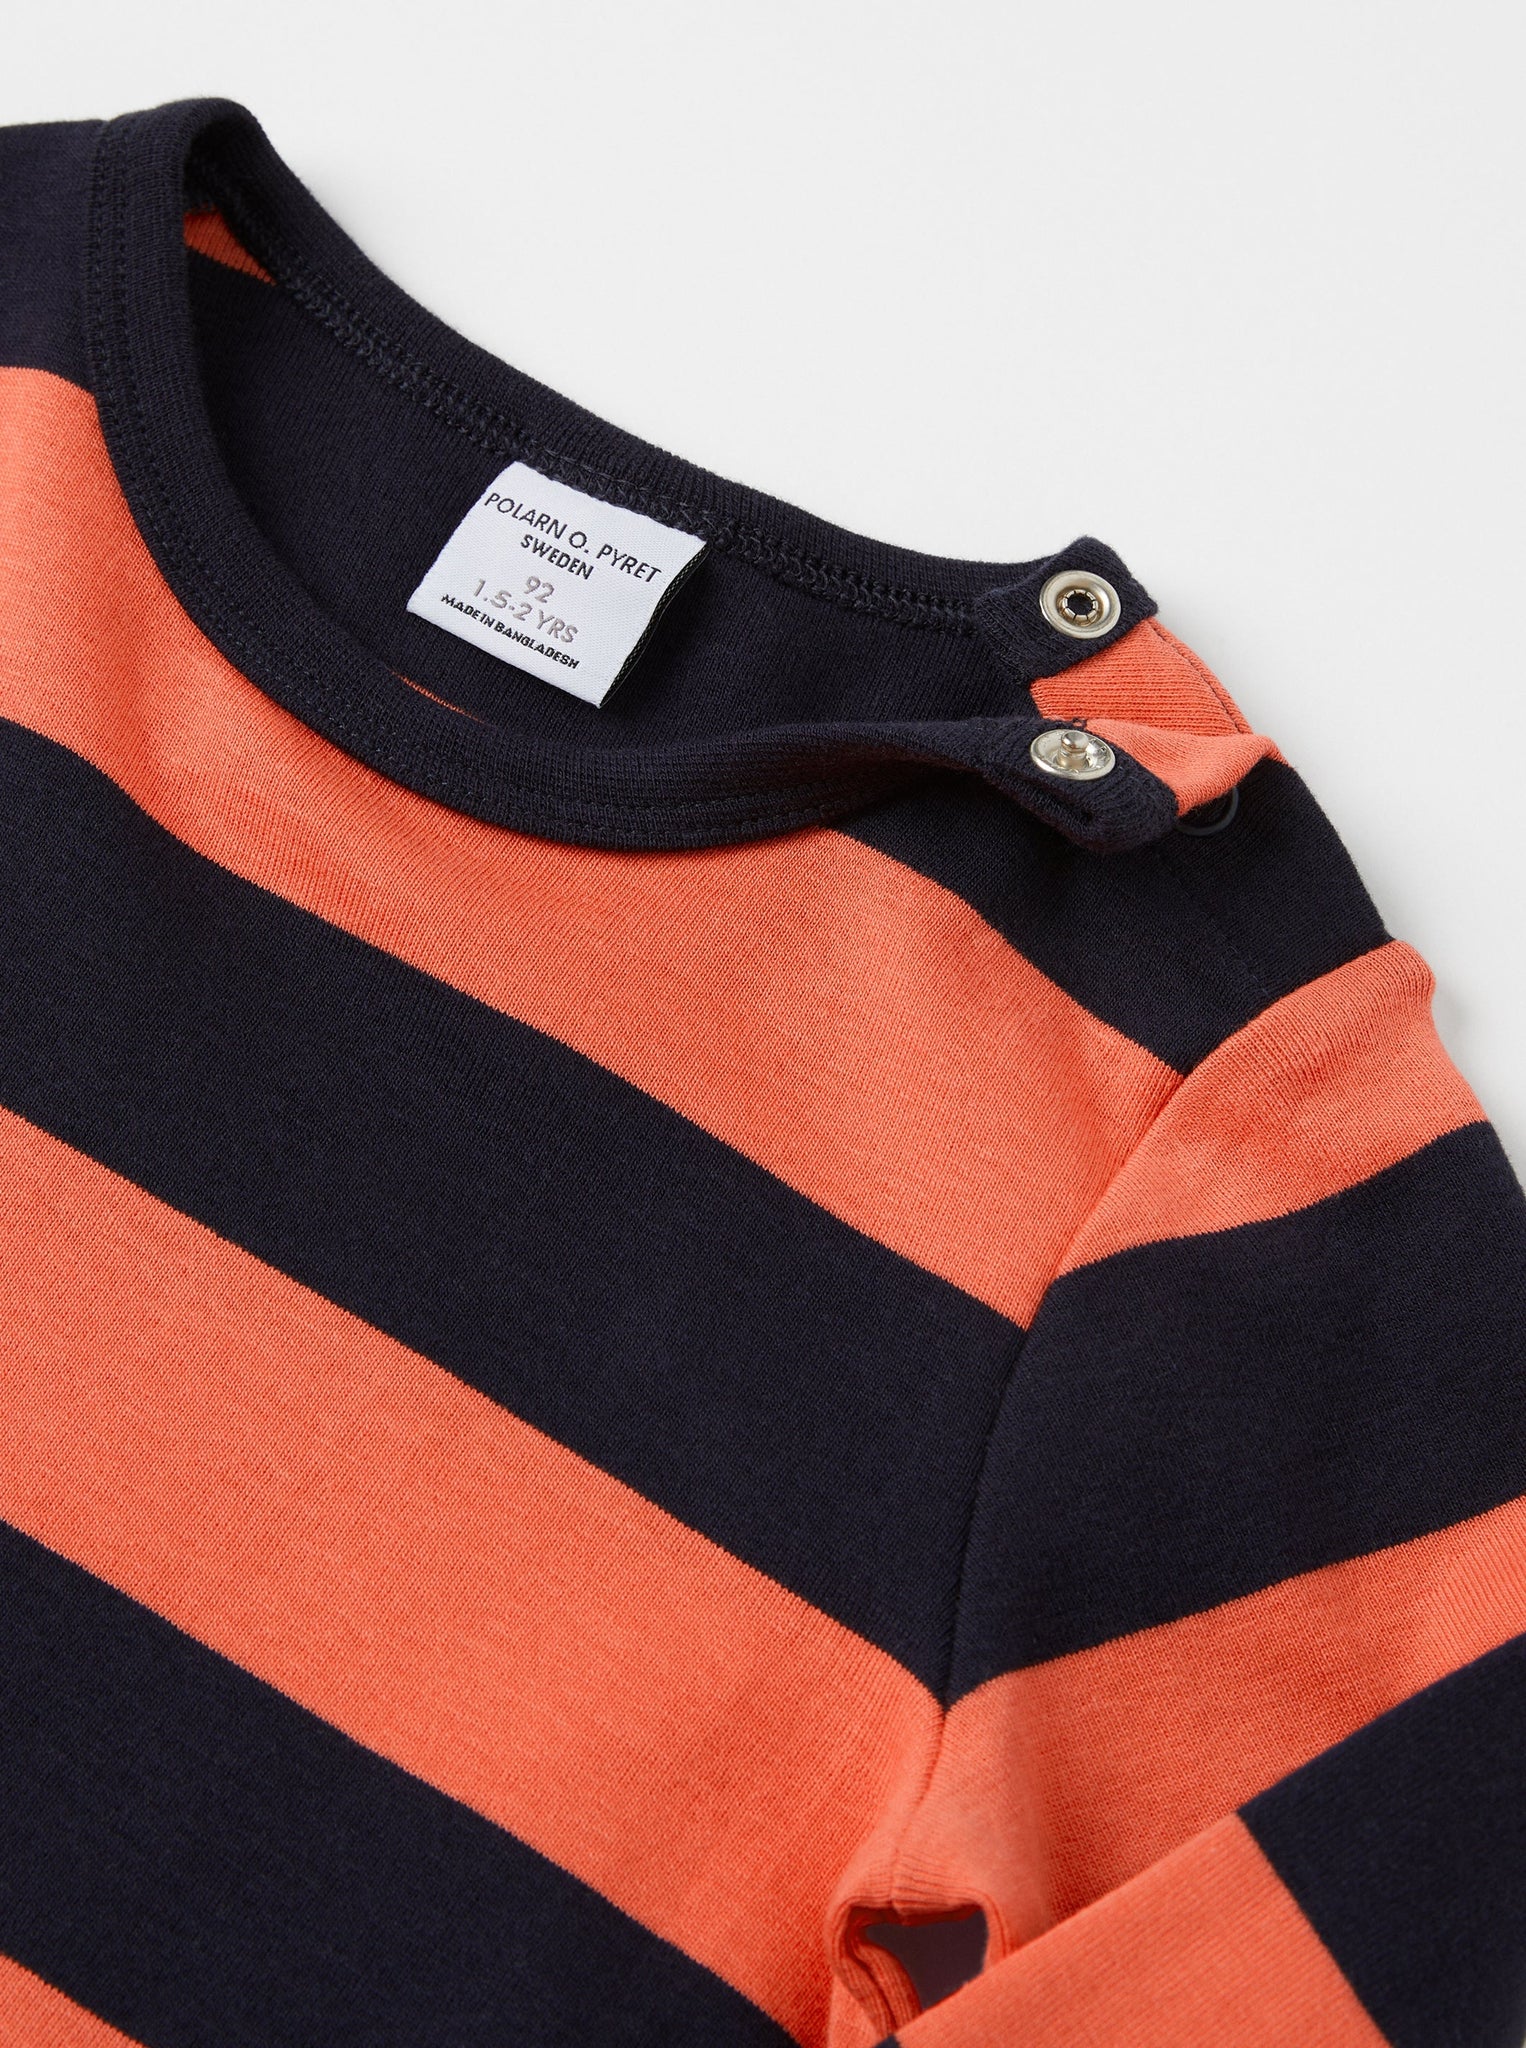 Striped Organic Cotton Orange Kids Top from the Polarn O. Pyret kidswear collection. Clothes made using sustainably sourced materials.